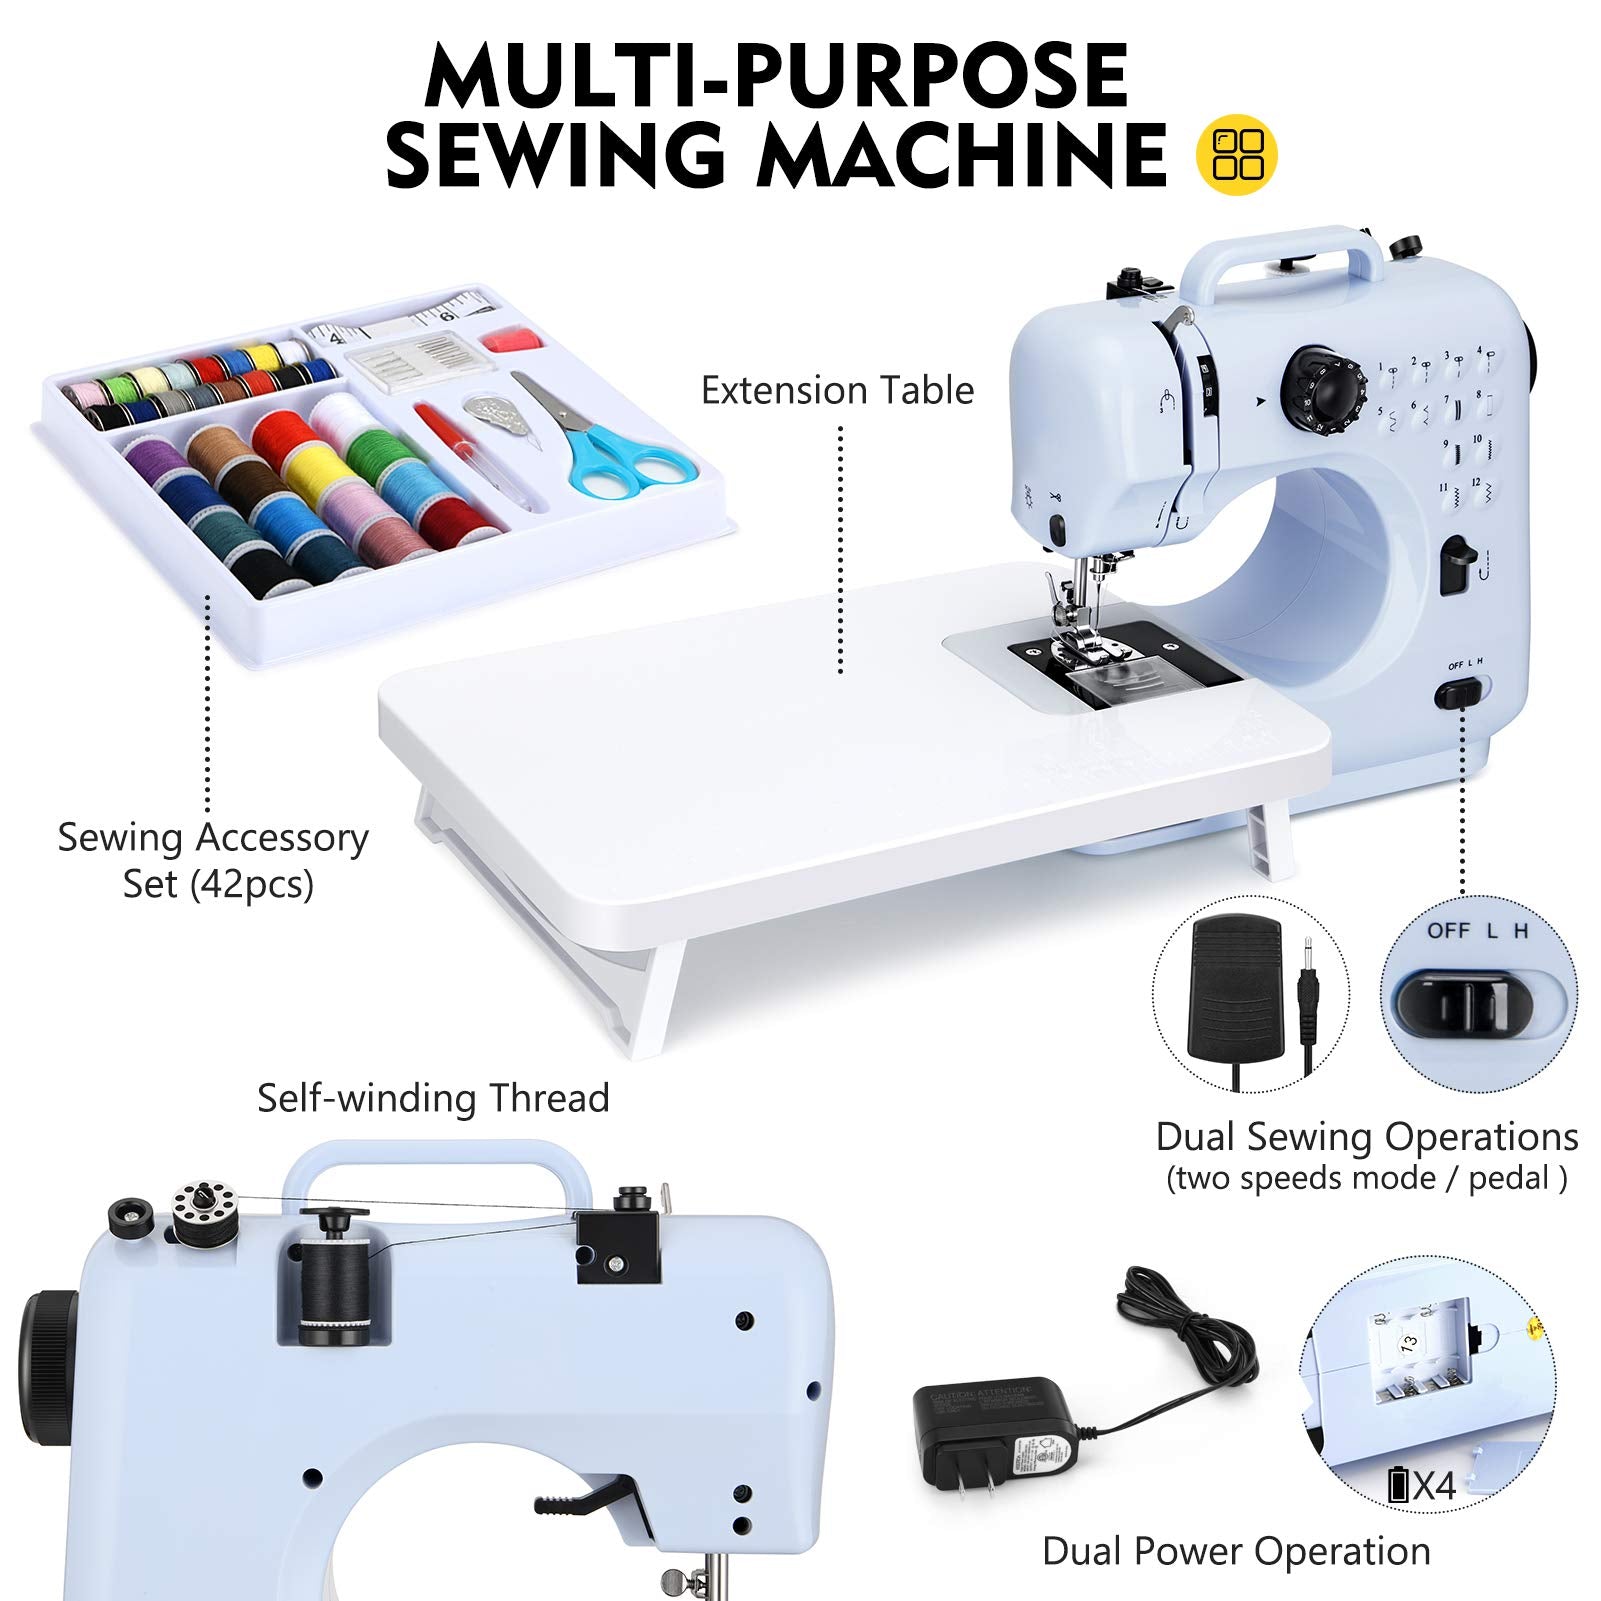 Mini Sewing Machine for Beginners, 505 Sewing Machine with Reverse Stitch  and 12 Built-in Stitches, Portable Sewing Machine, Household Electric Sewing  MachineSewing Kit Included 